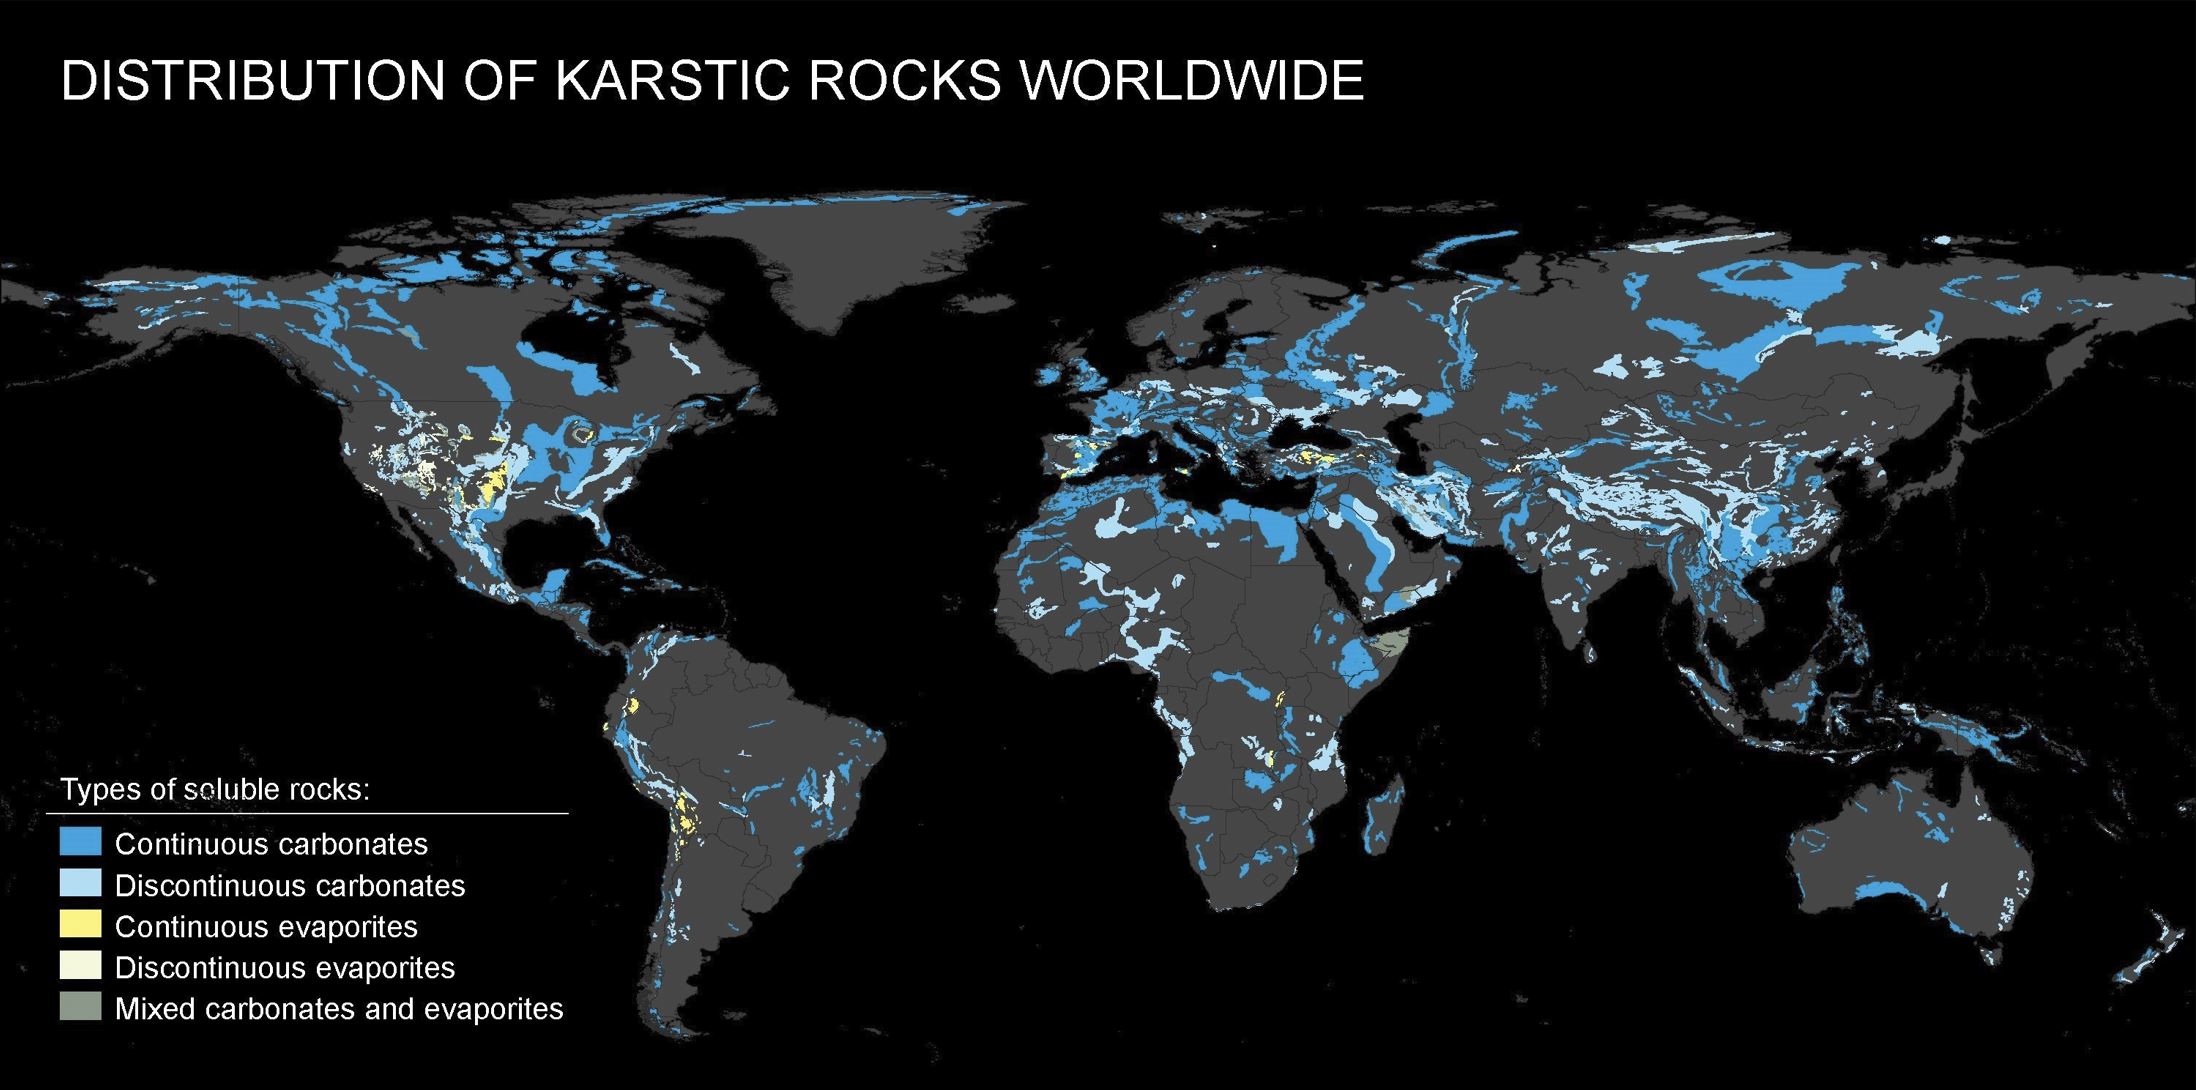 The distribution of karstic rocks worldwide is illustrated above using the <whymap_karst__v1_poly.shp> shapefile available for downloading from the WHYMAP (Worldwide Hydrogeological Mapping and Assessment Program WOKAM (World Karst Aquifer Map) project site <www.whymap.org>. Source of the equirectangular projection of the world with topography and bathymetry is the NASA Goddard Flight Center Visible Earth Catalogue.